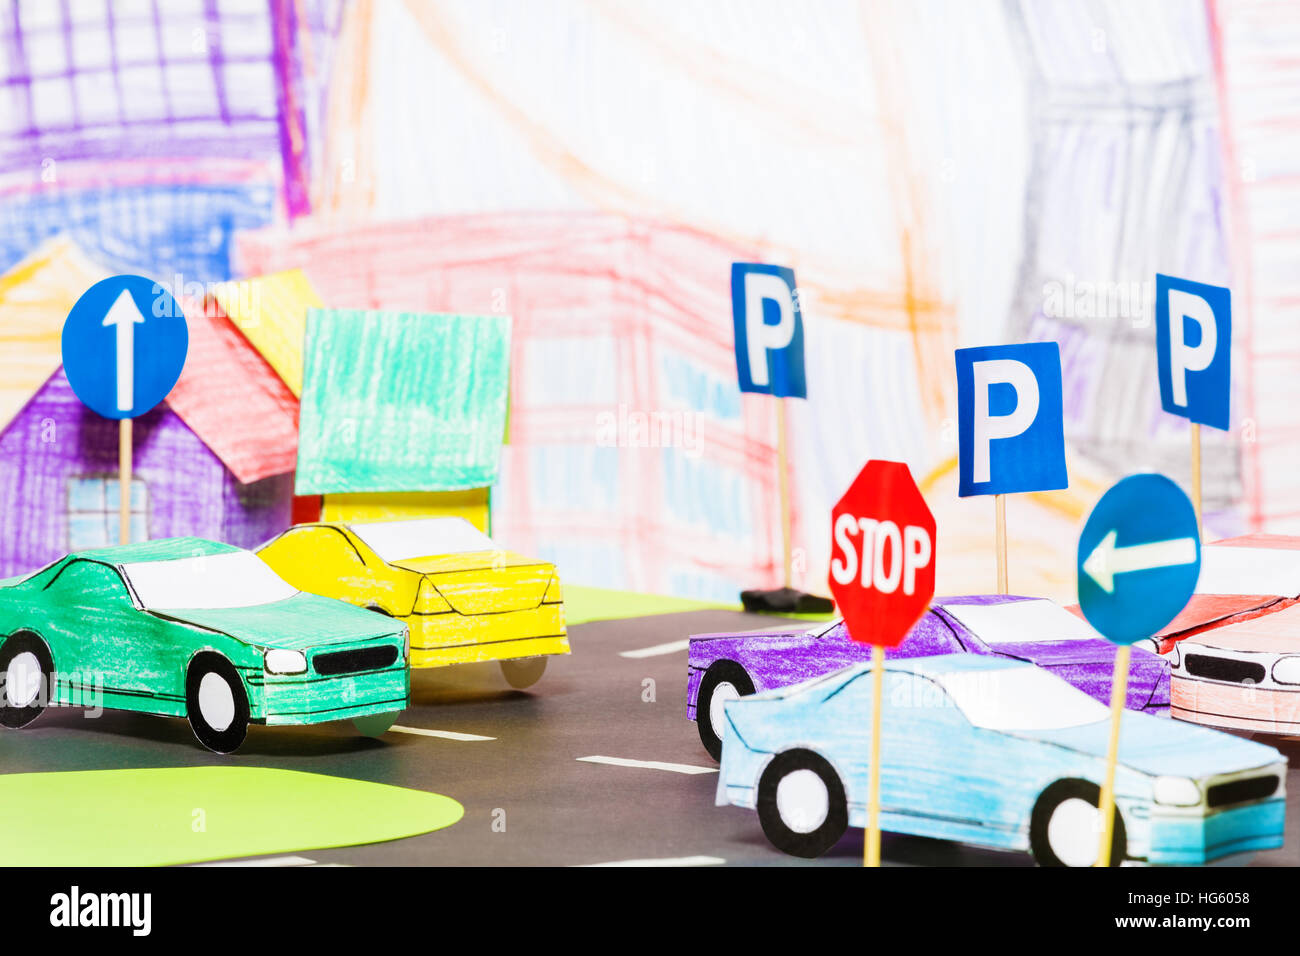 Road traffic in the toy town with handmade cars Stock Photo